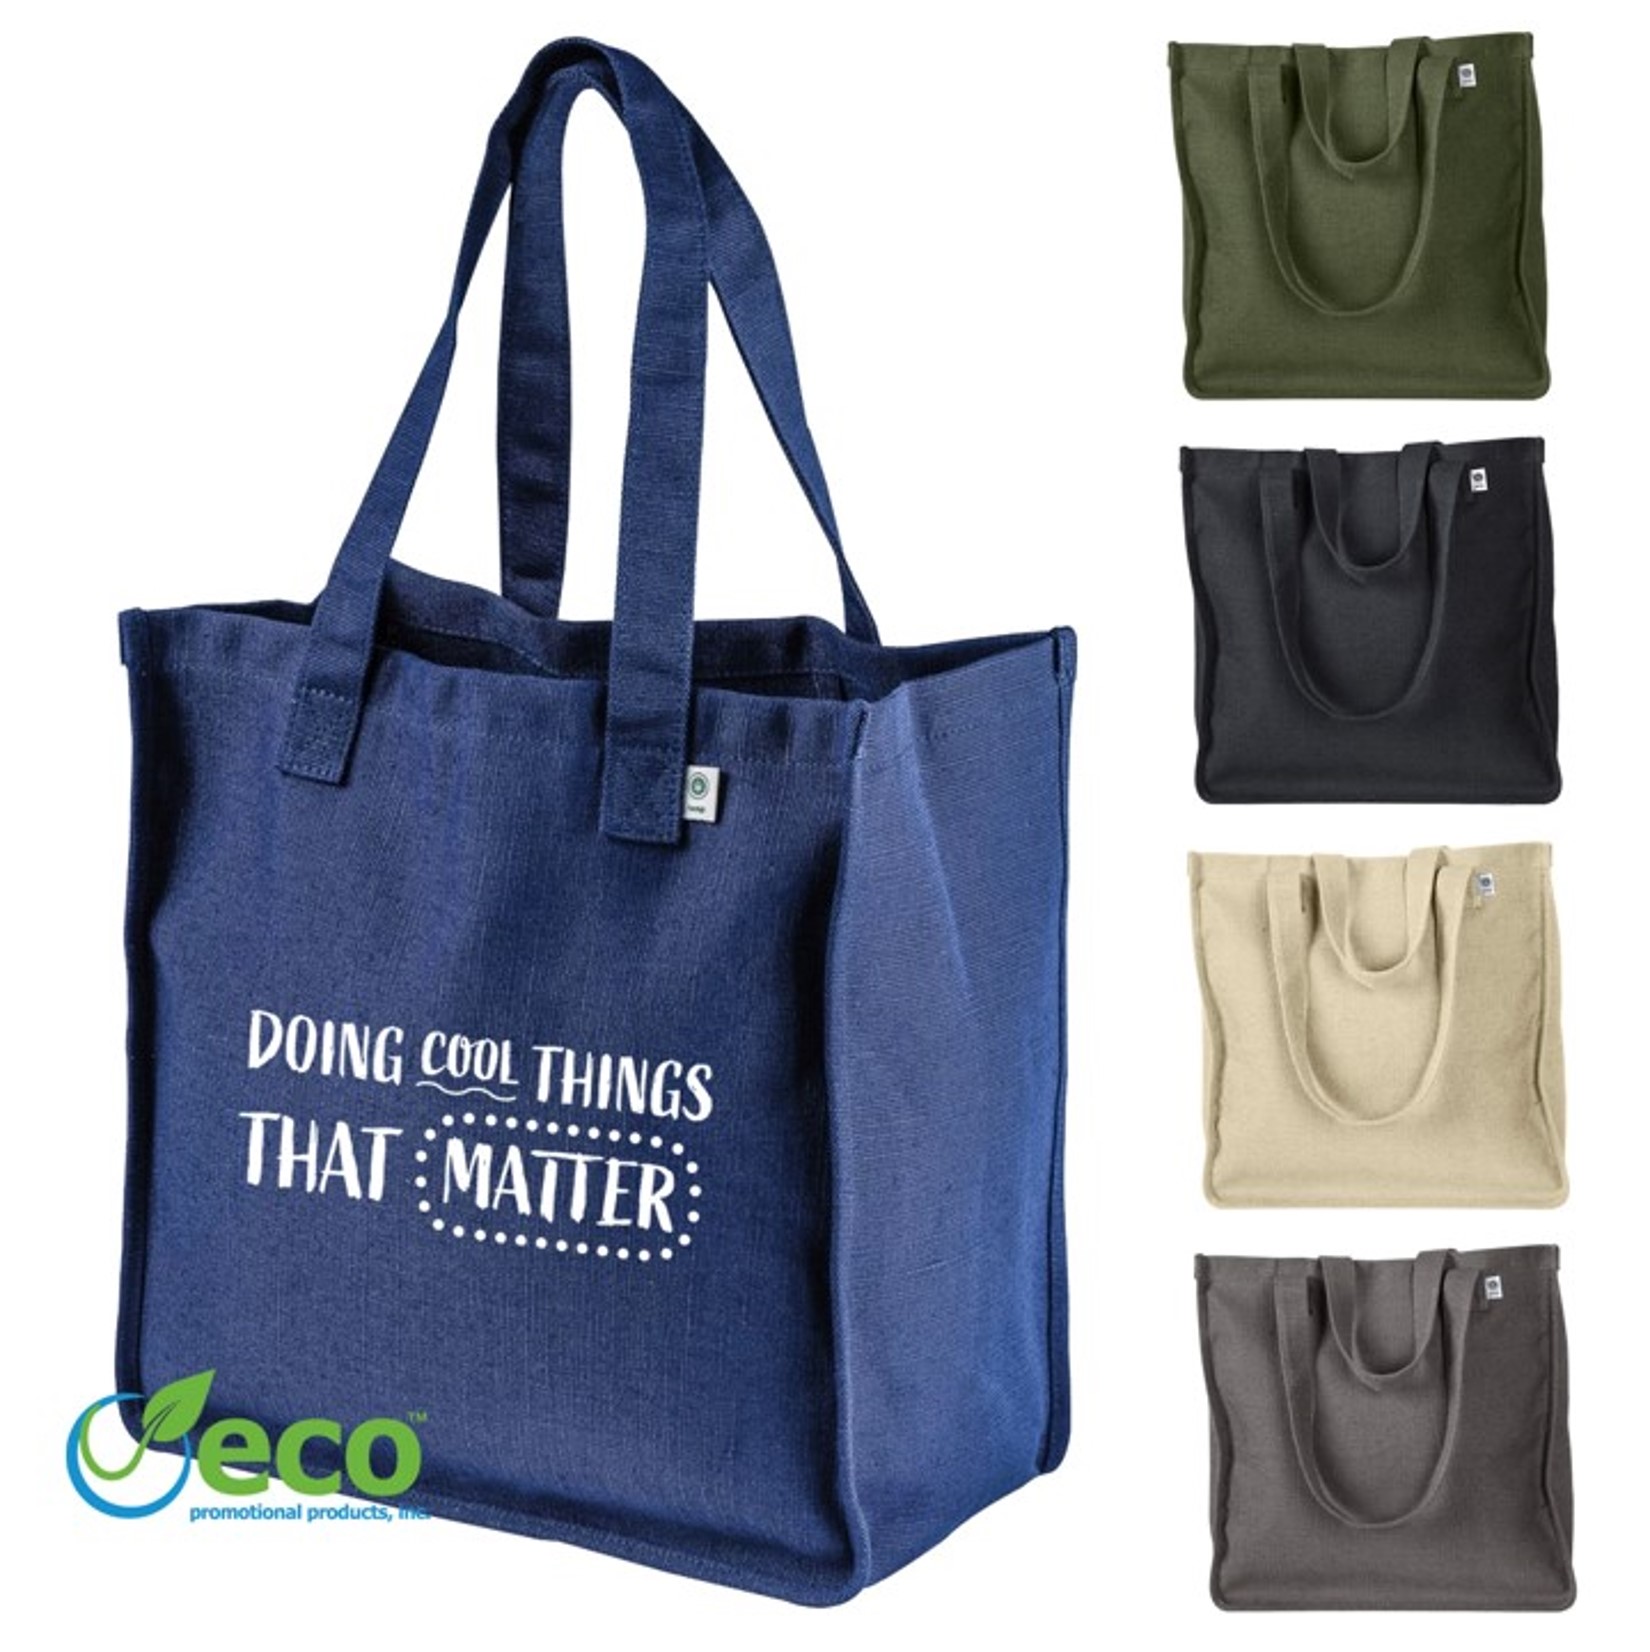 customized tote with five color options